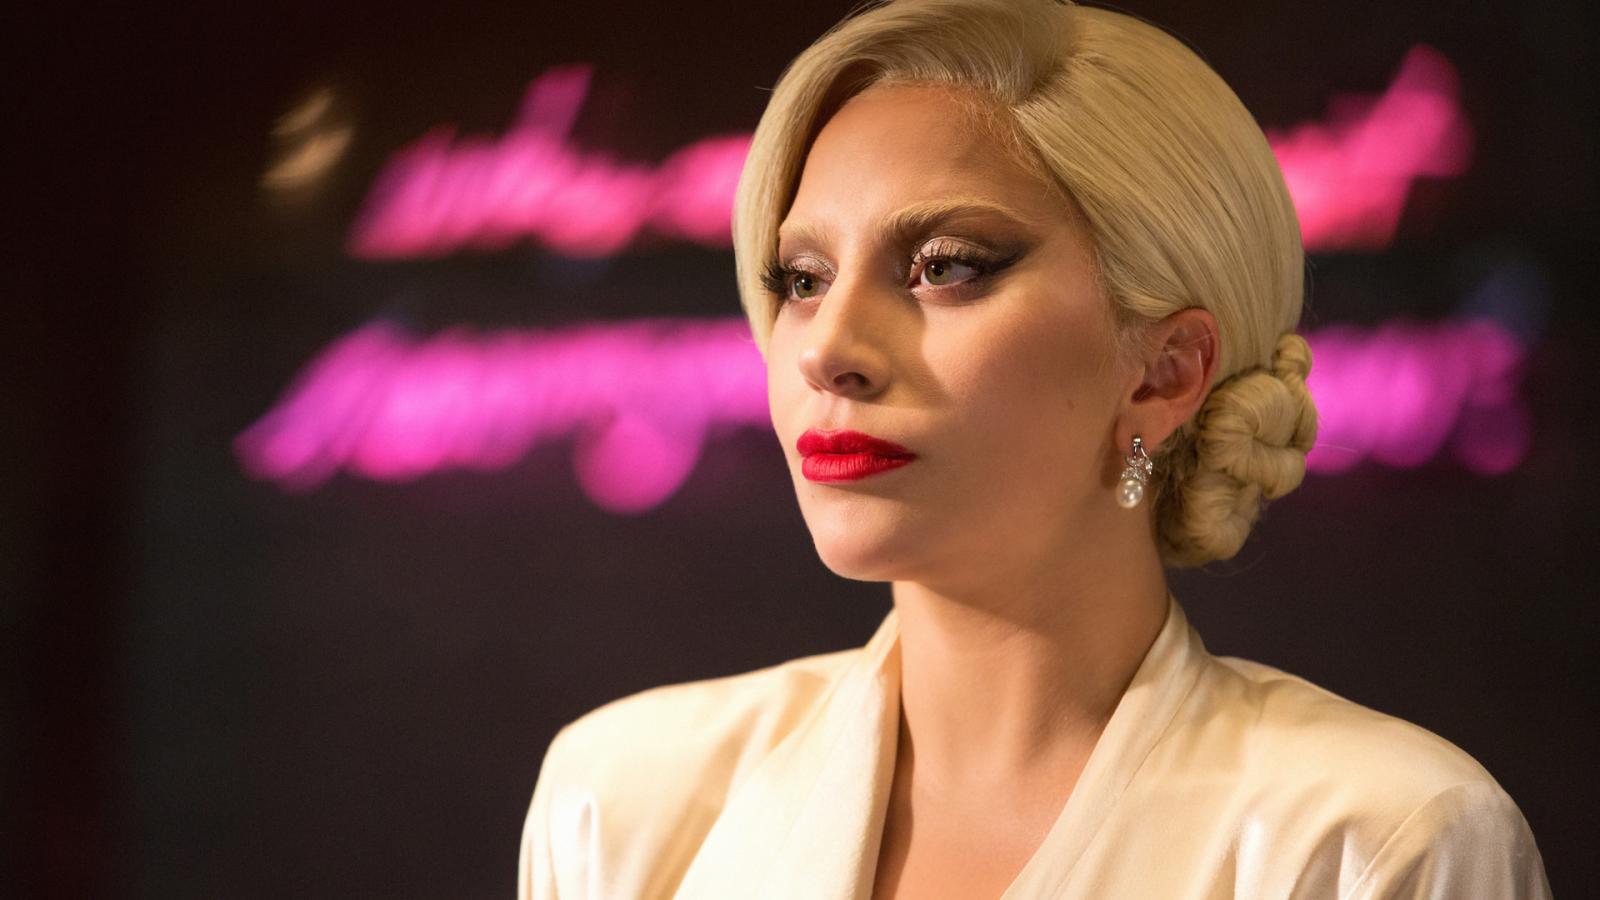 Ranking 10 Best American Horror Story Characters (Lady Gaga is Only #2) - image 9